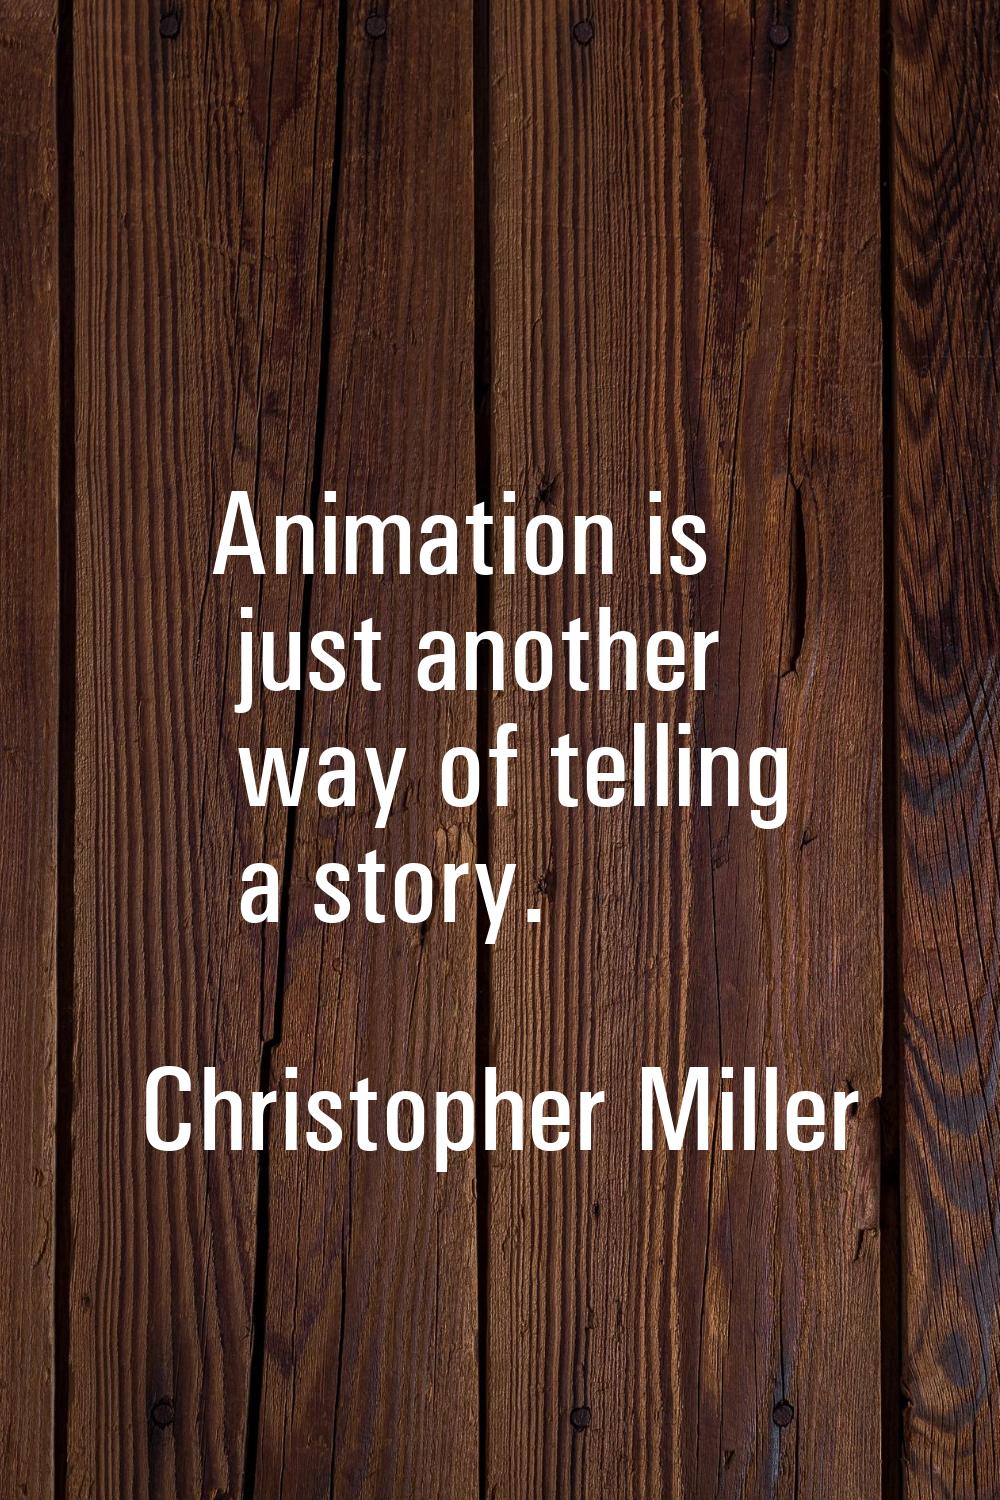 Animation is just another way of telling a story.